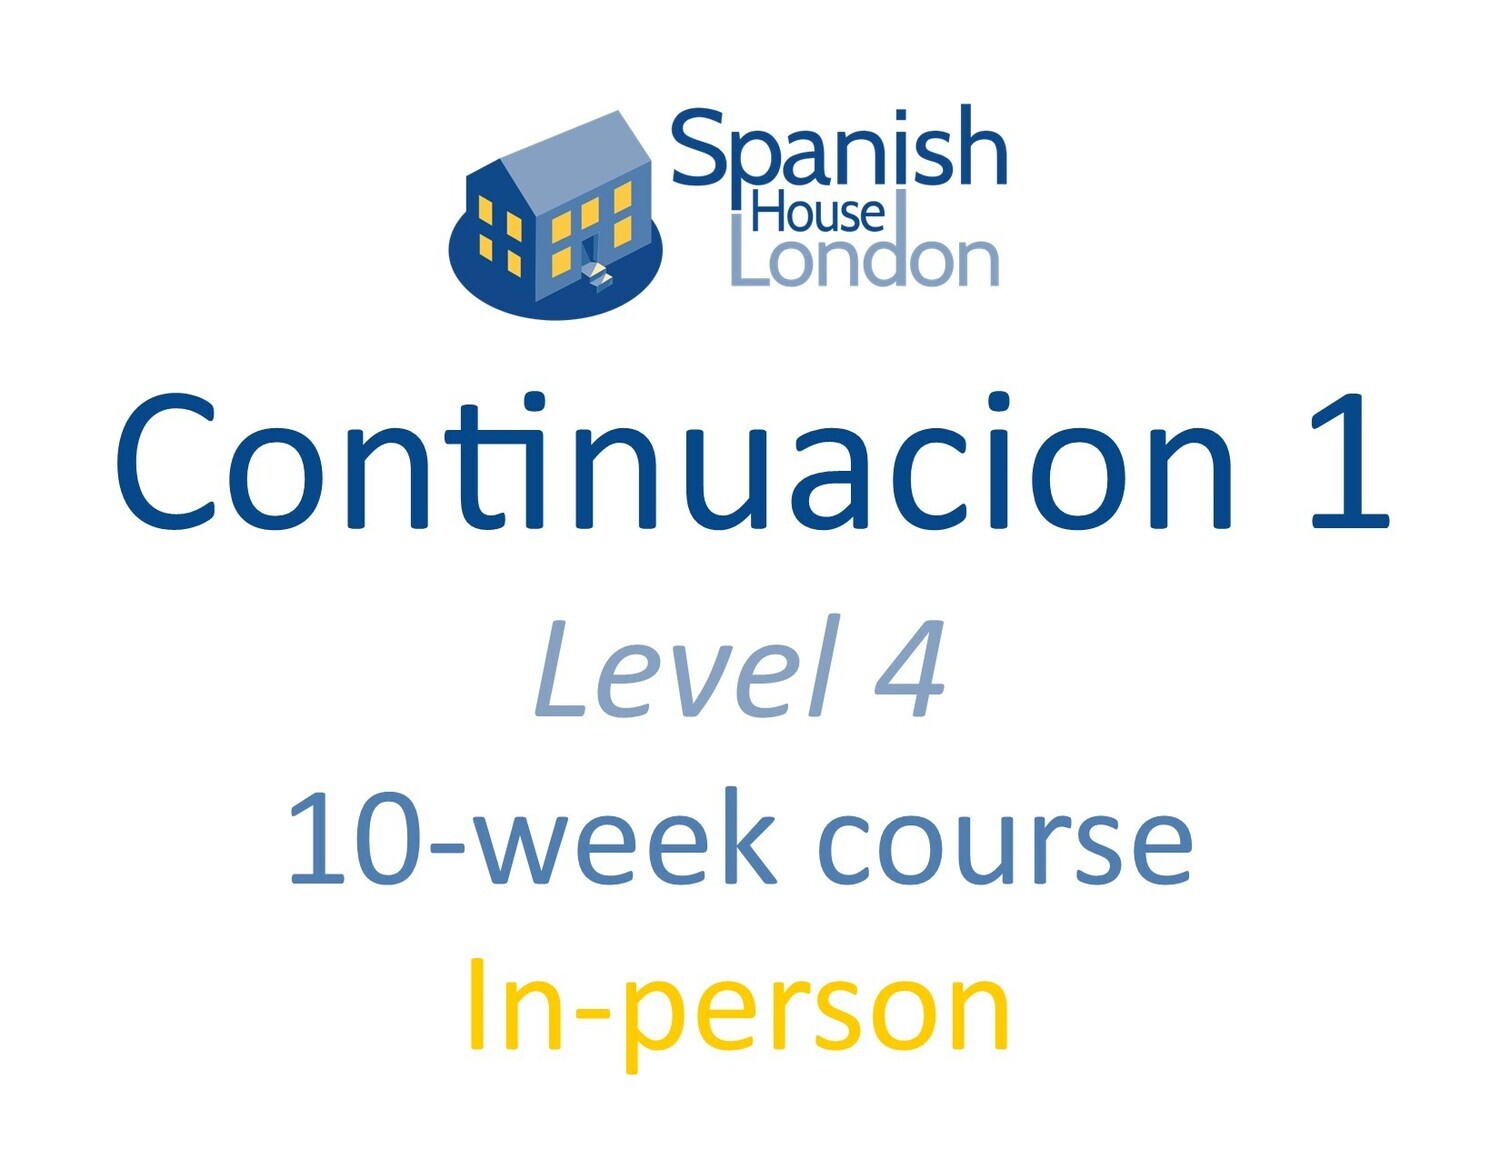 Continuacion 1 Course starting on 12th April at 6pm in Euston / King's Cross